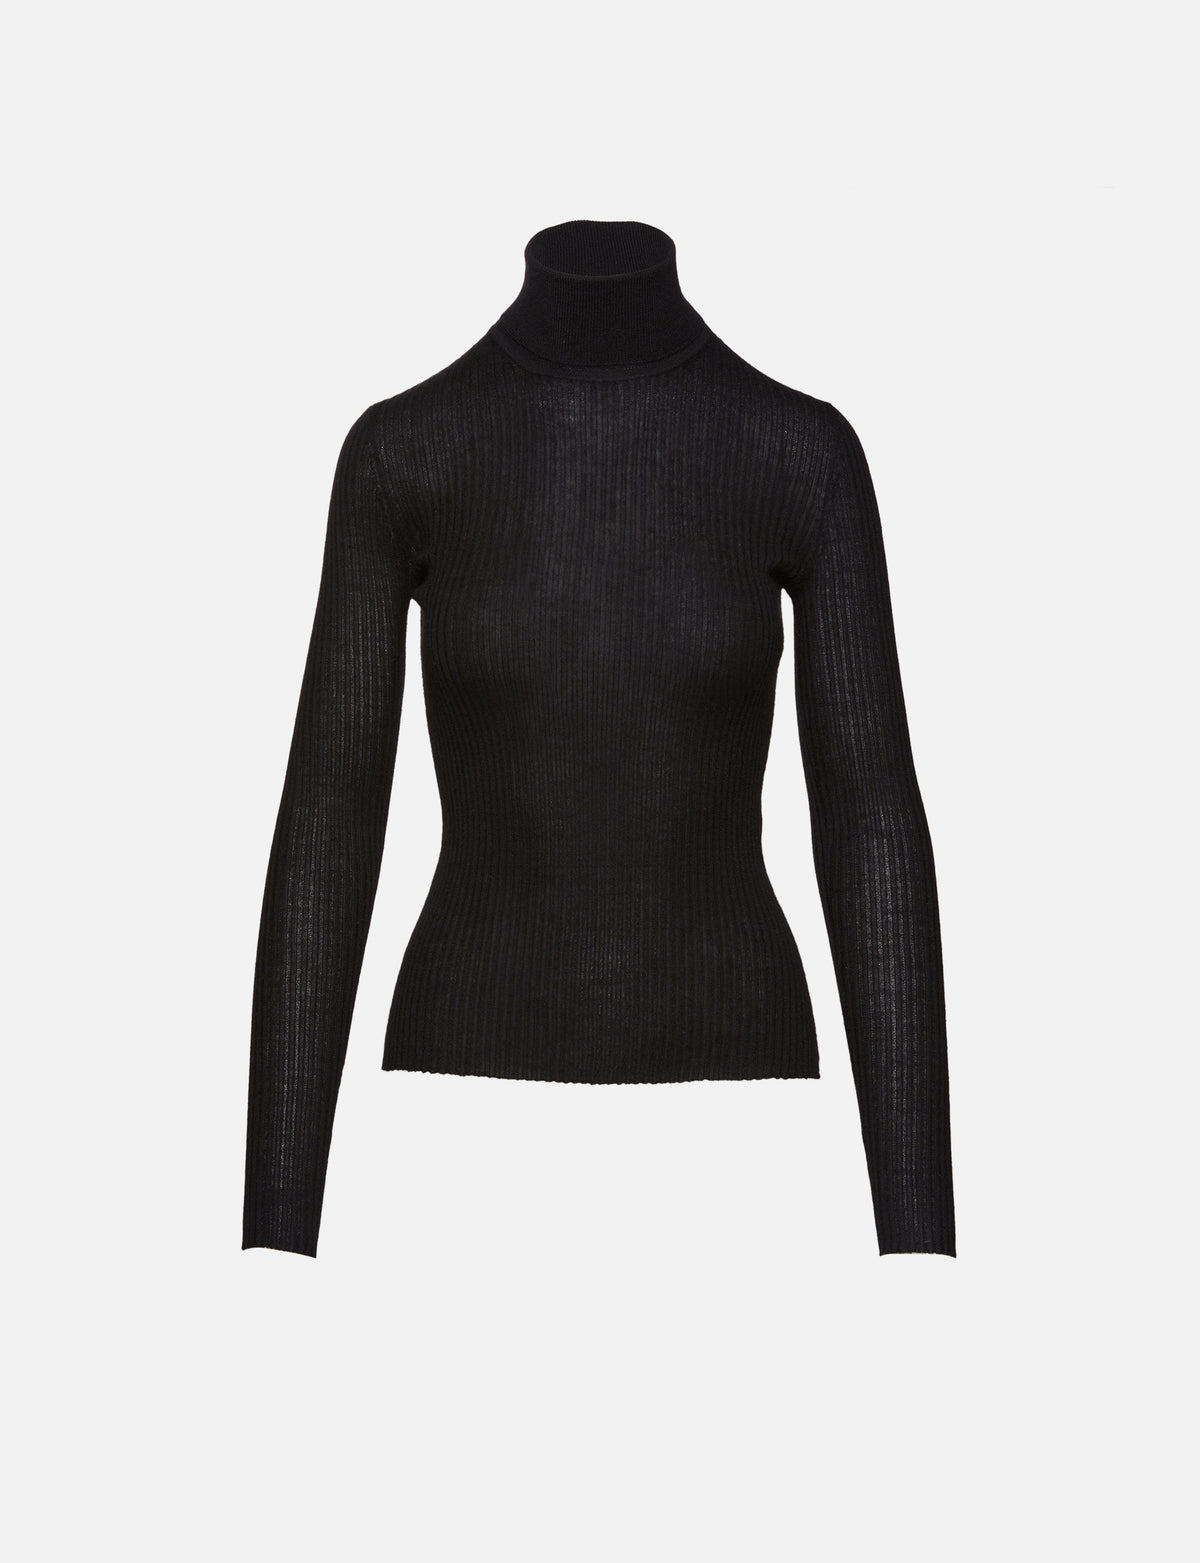 view 4 - Peppe Turtleneck